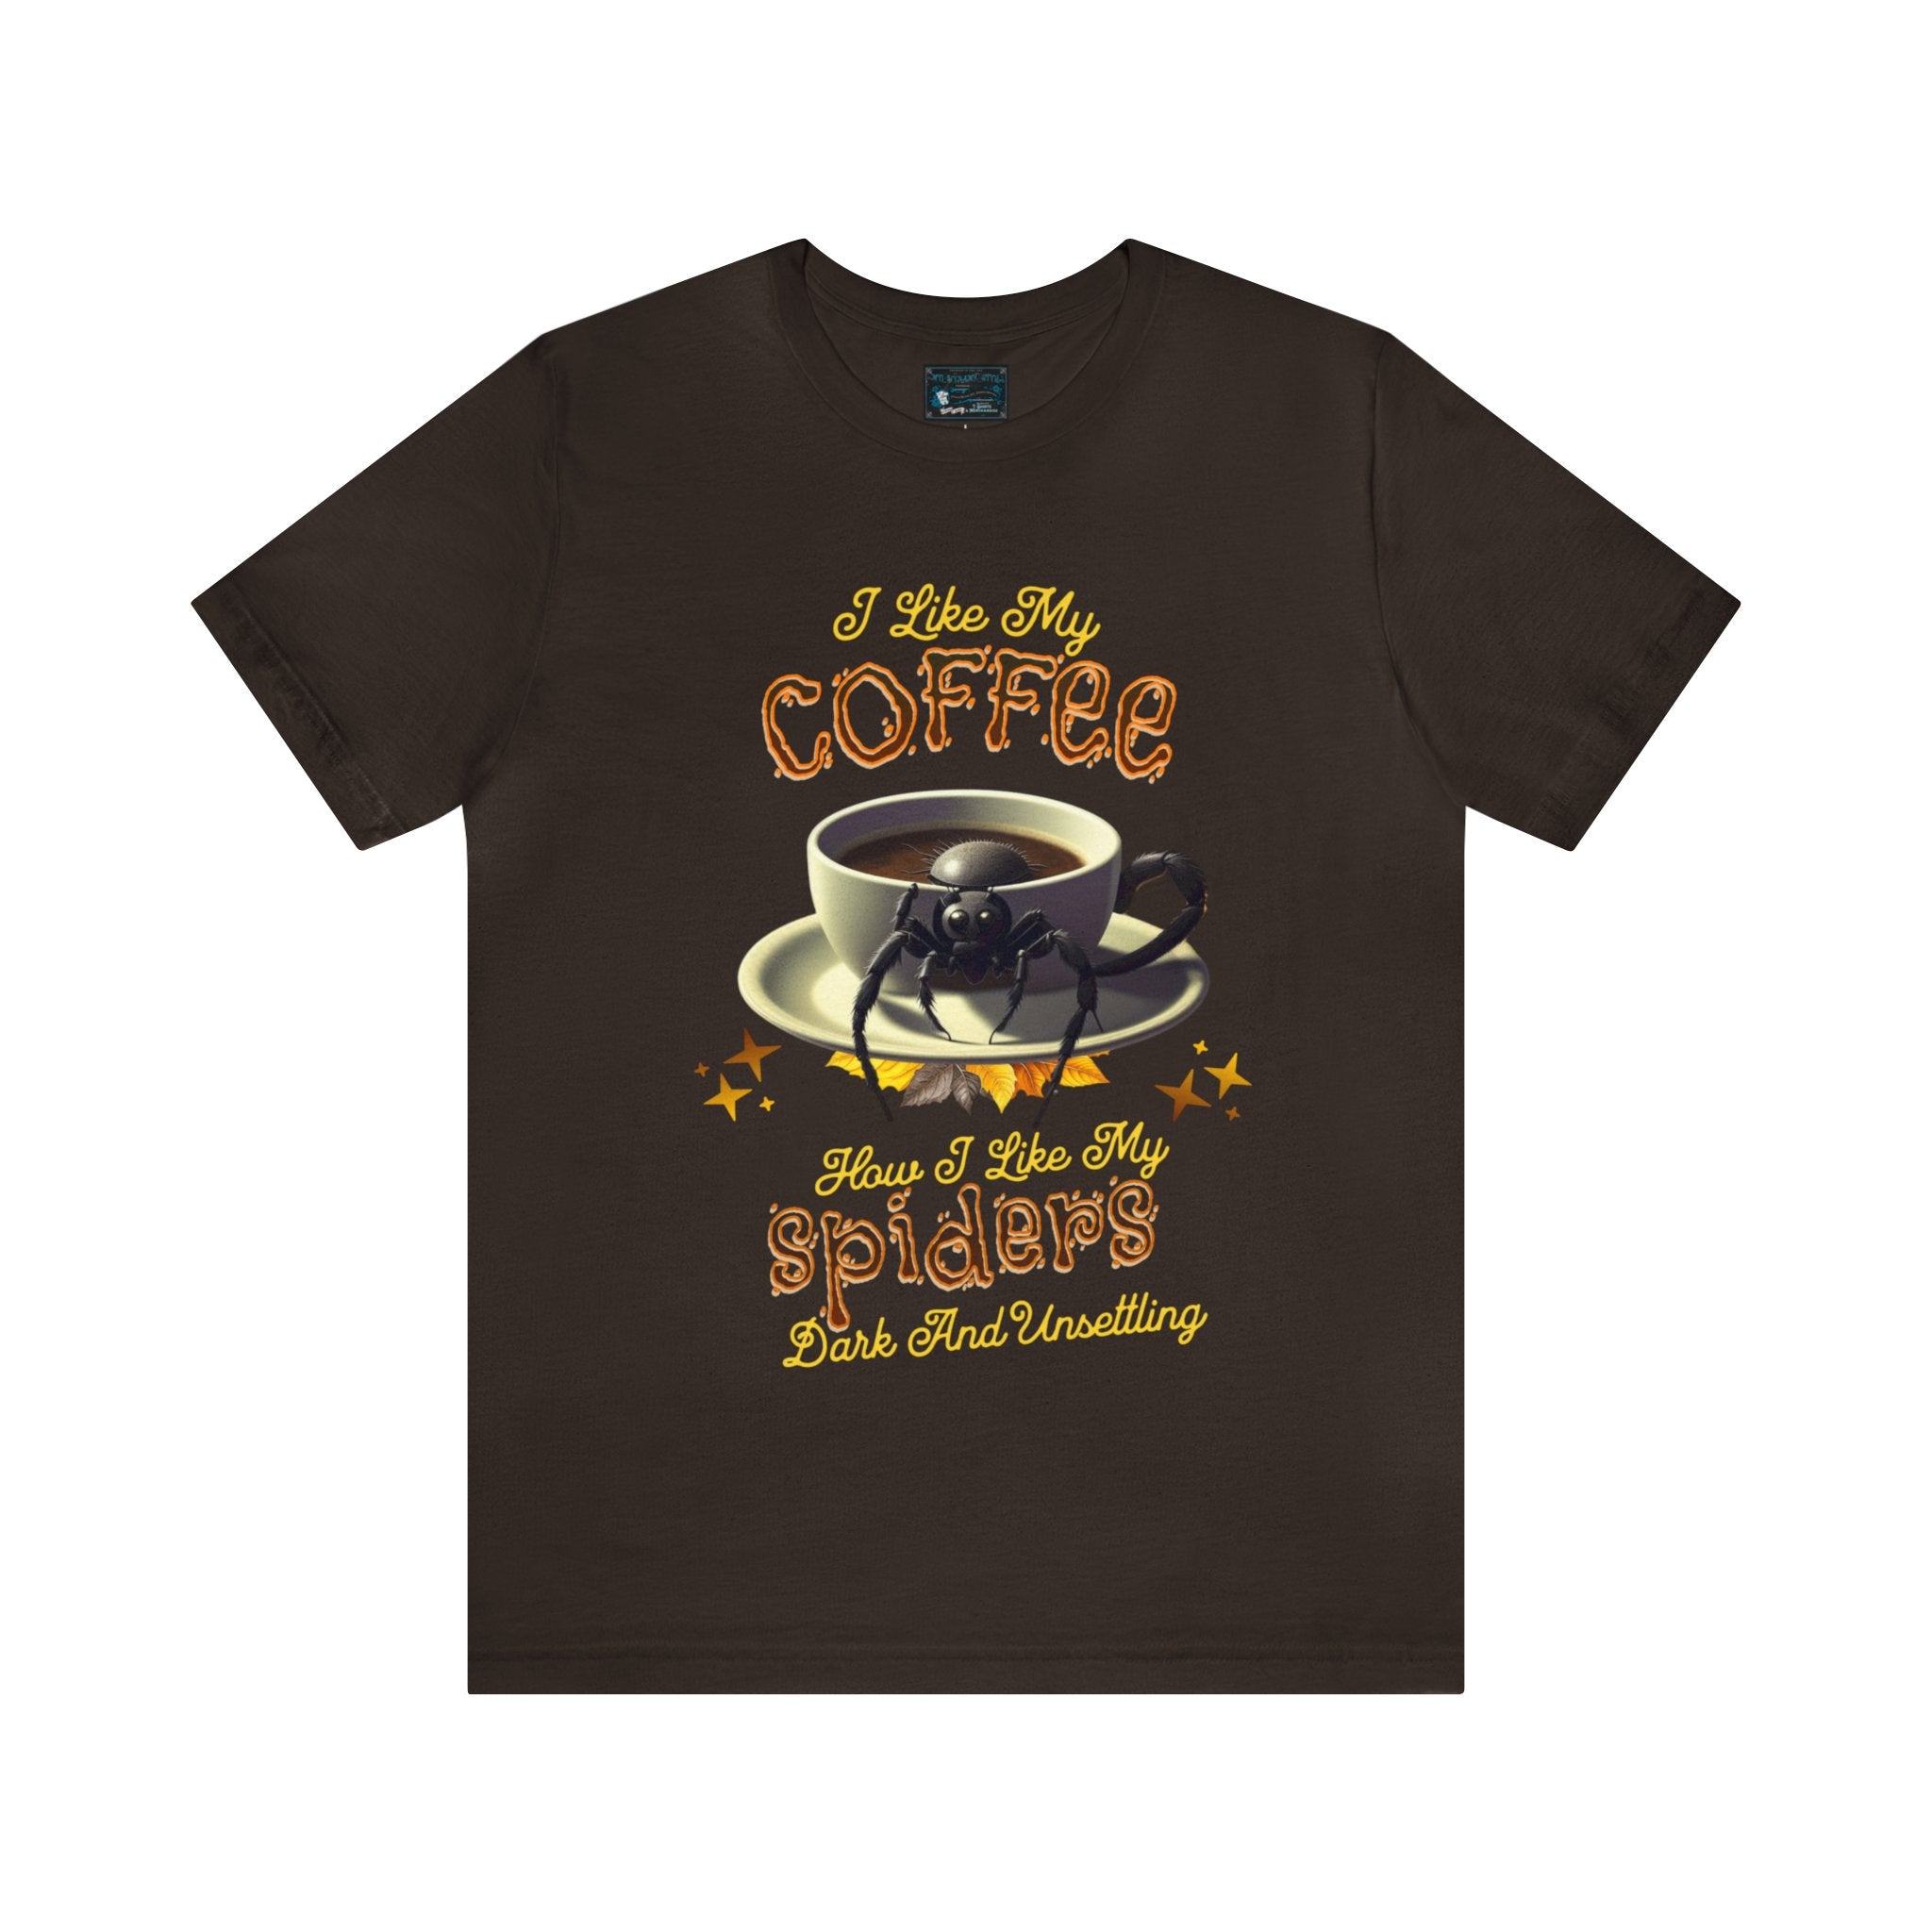 a t - shirt with a cup of coffee on it